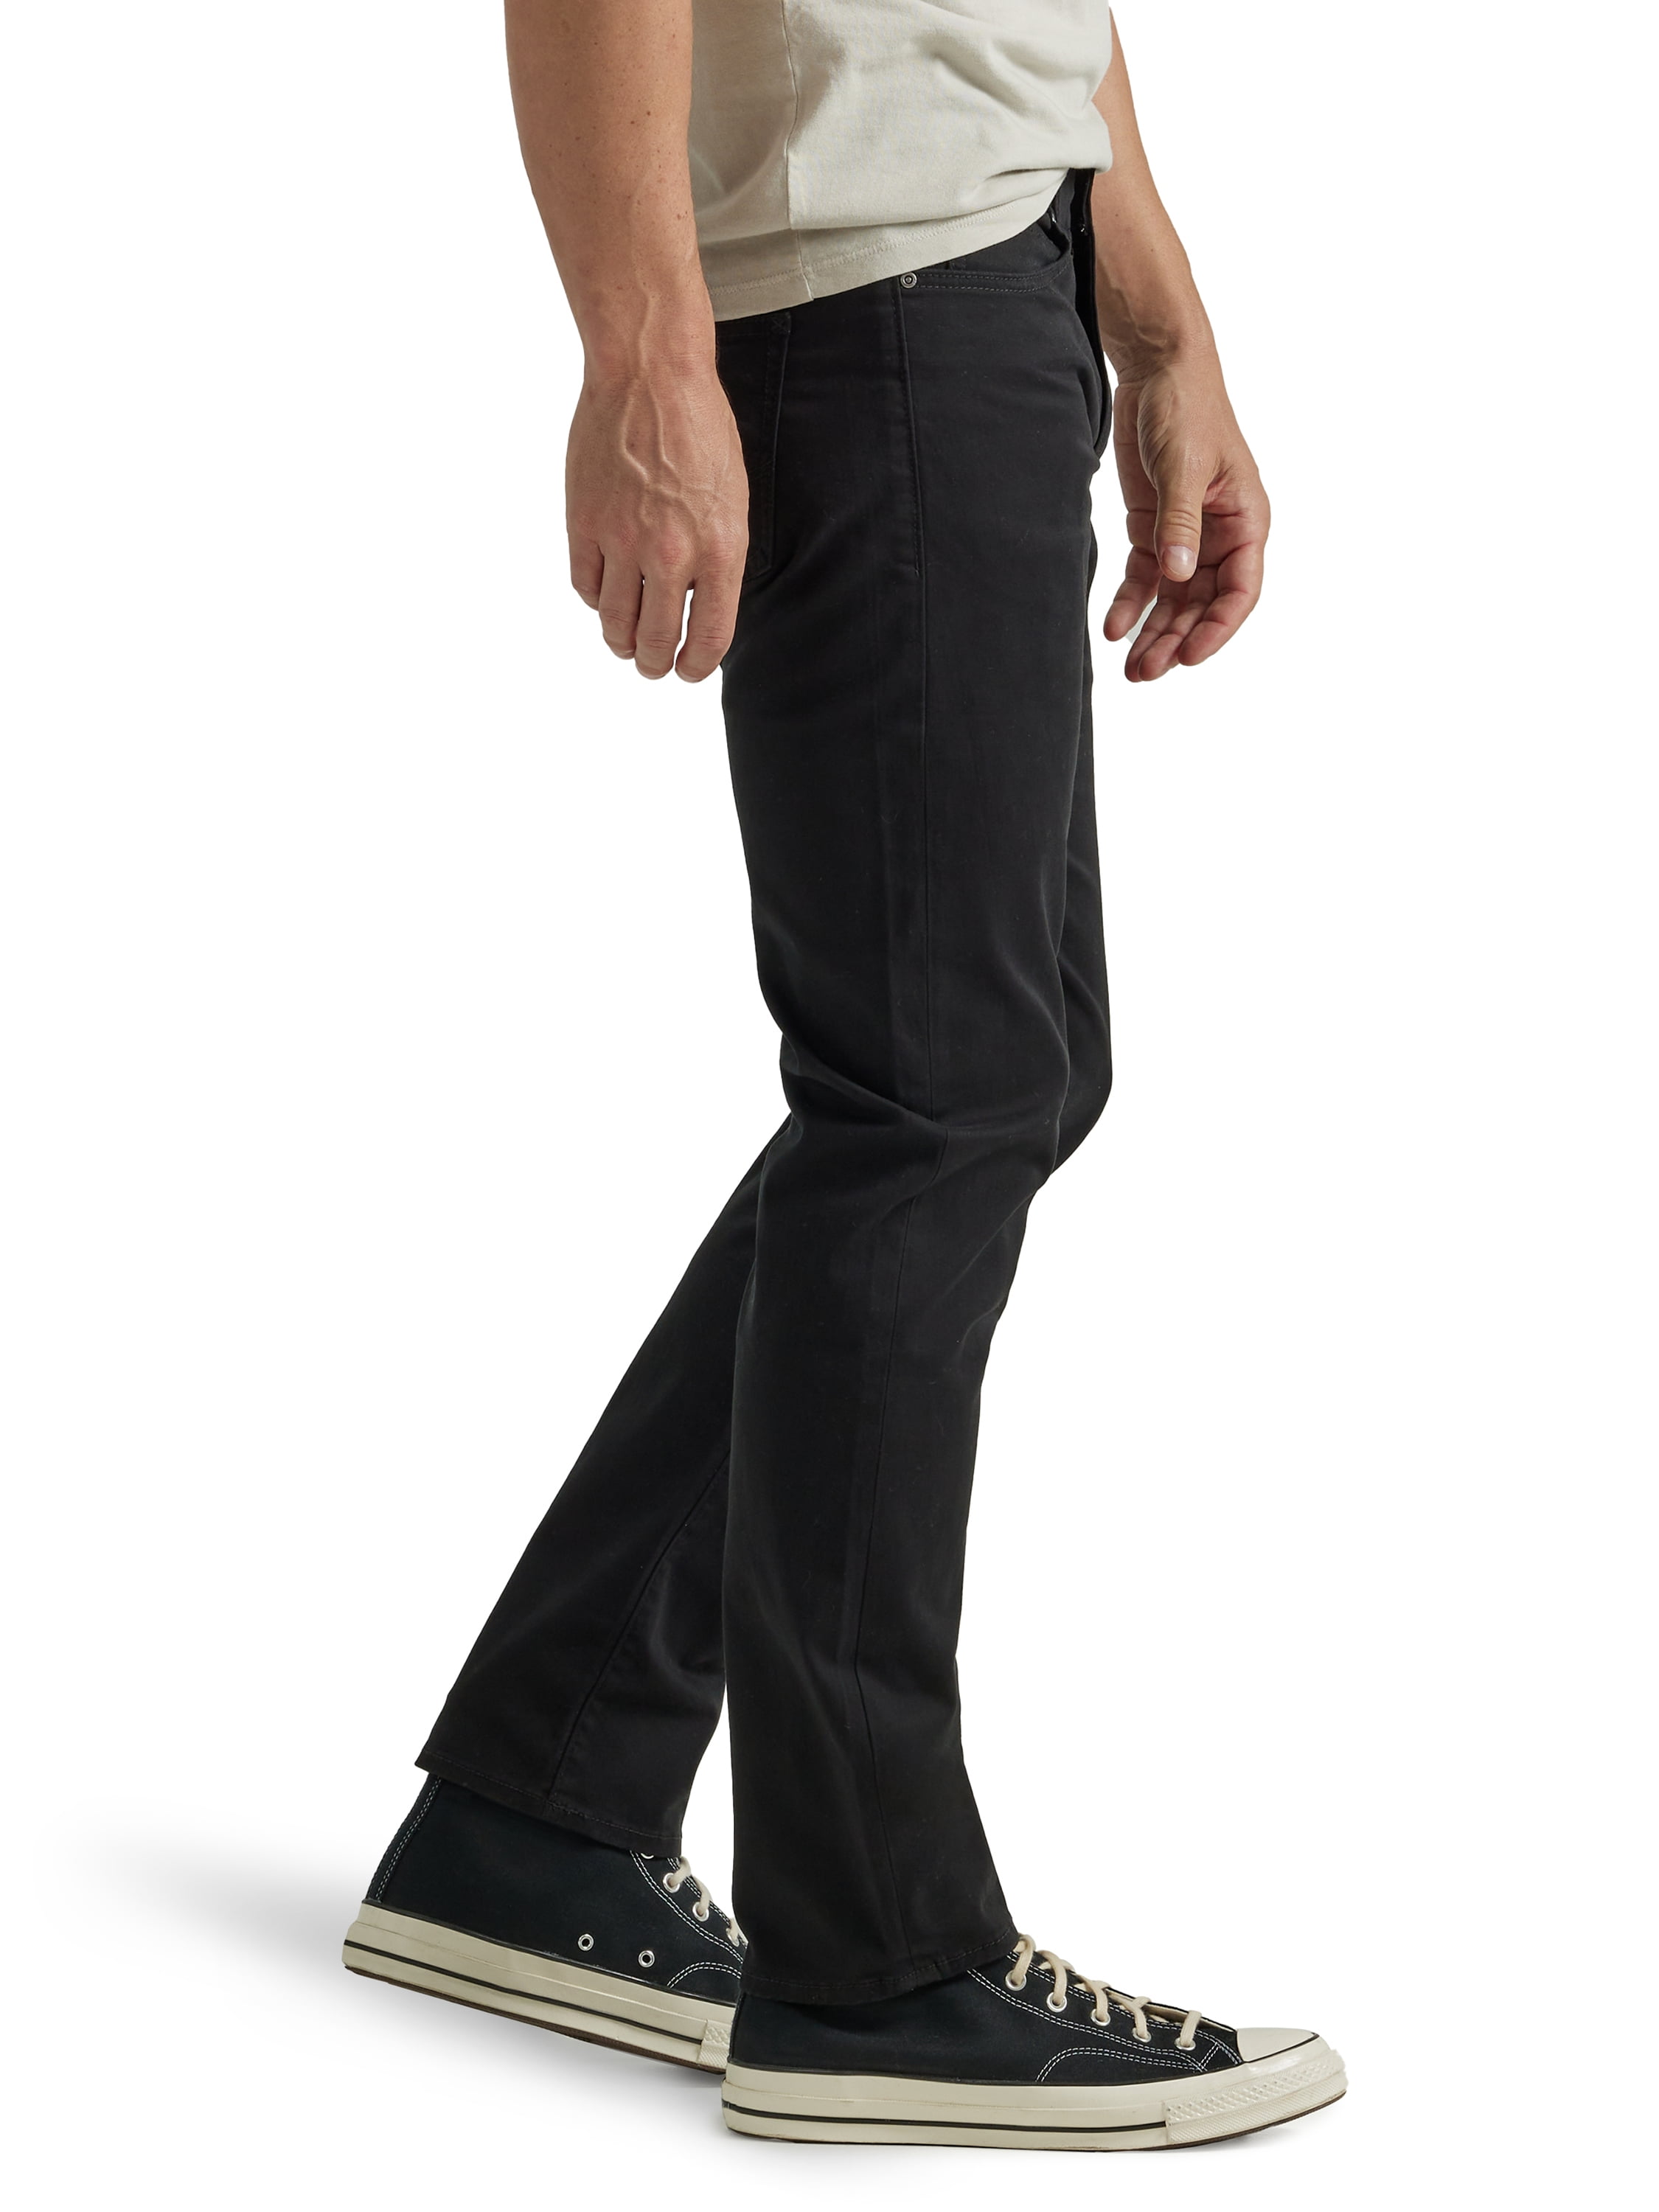 Men's Extreme Motion 4-Way Stretch Slim Straight Jean in Wallace